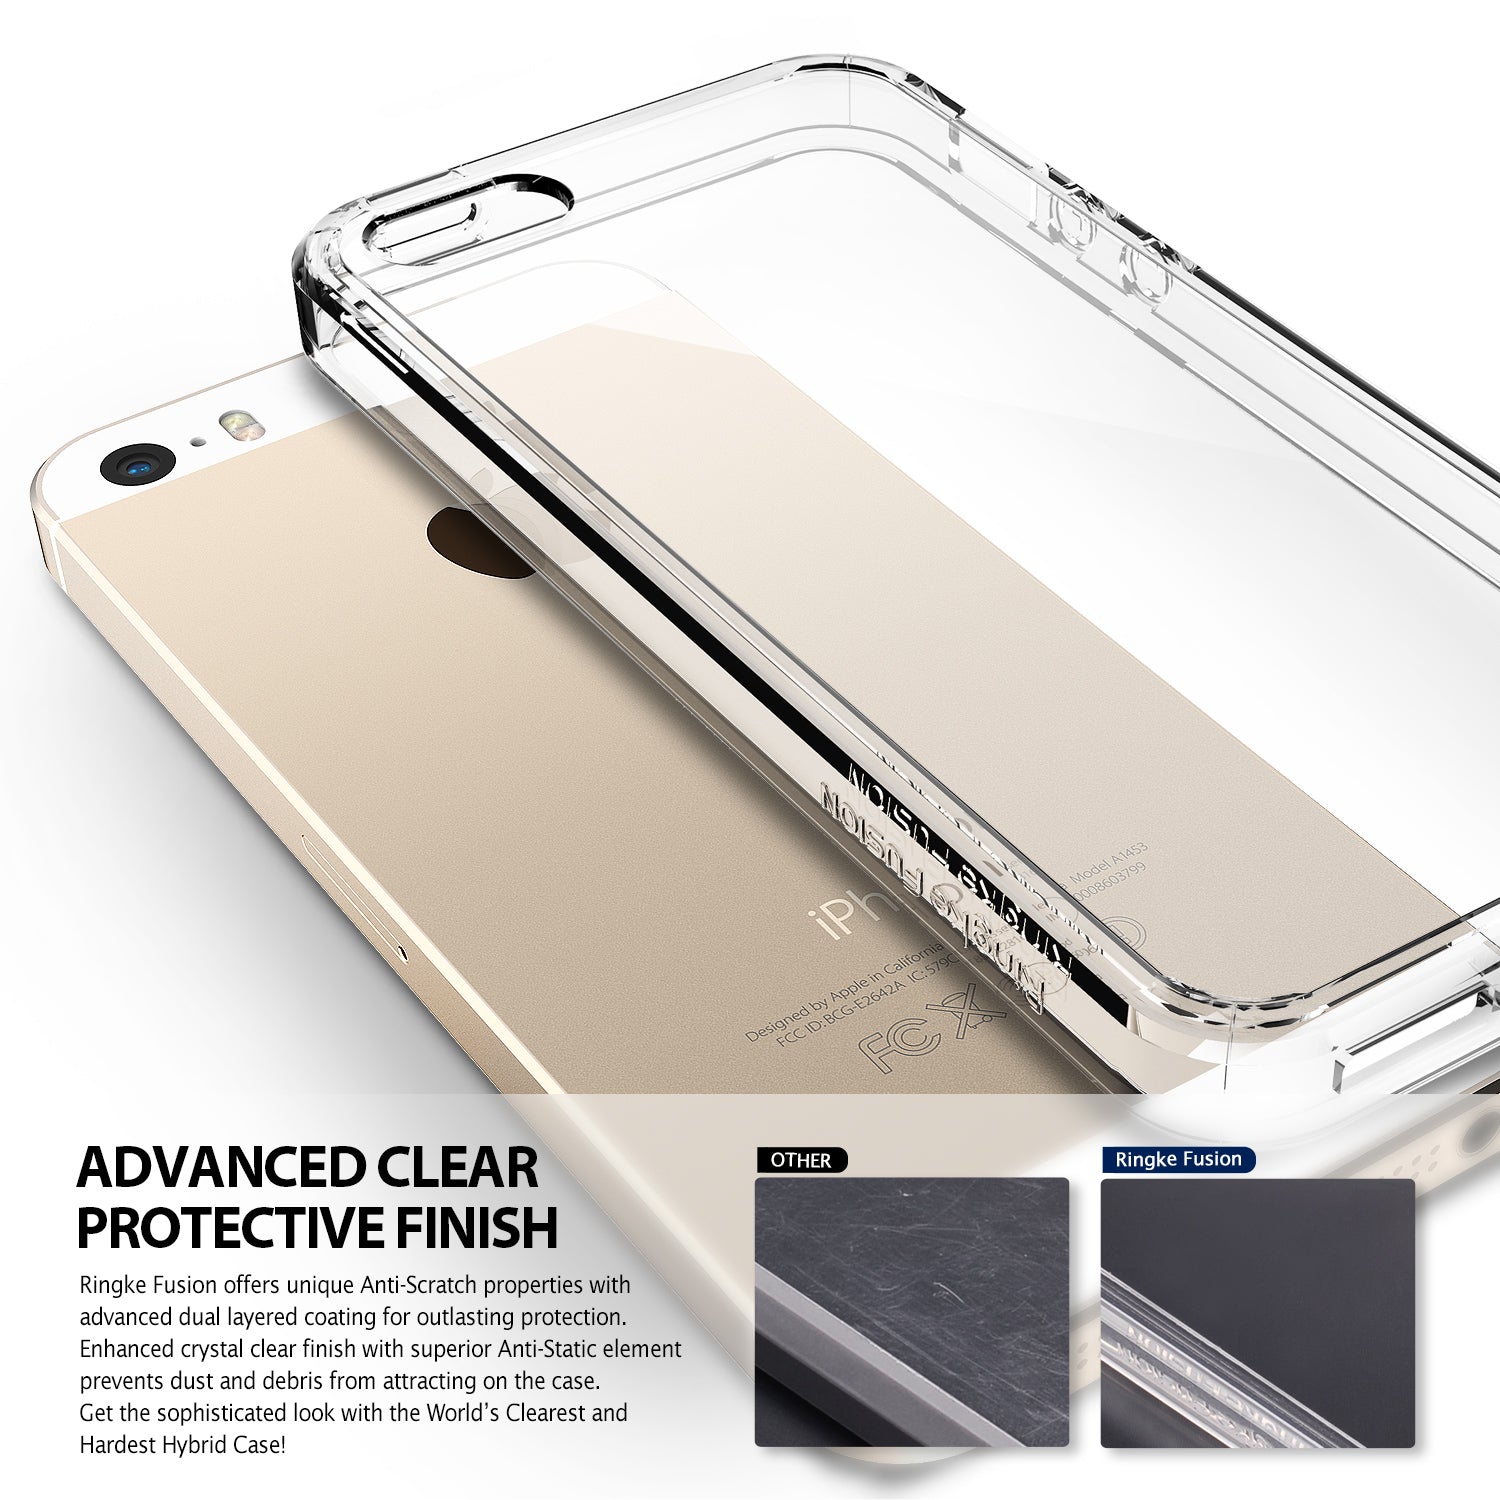 ringke fusion transparent clear back case cover for iphone se 5s 5 main transparent view